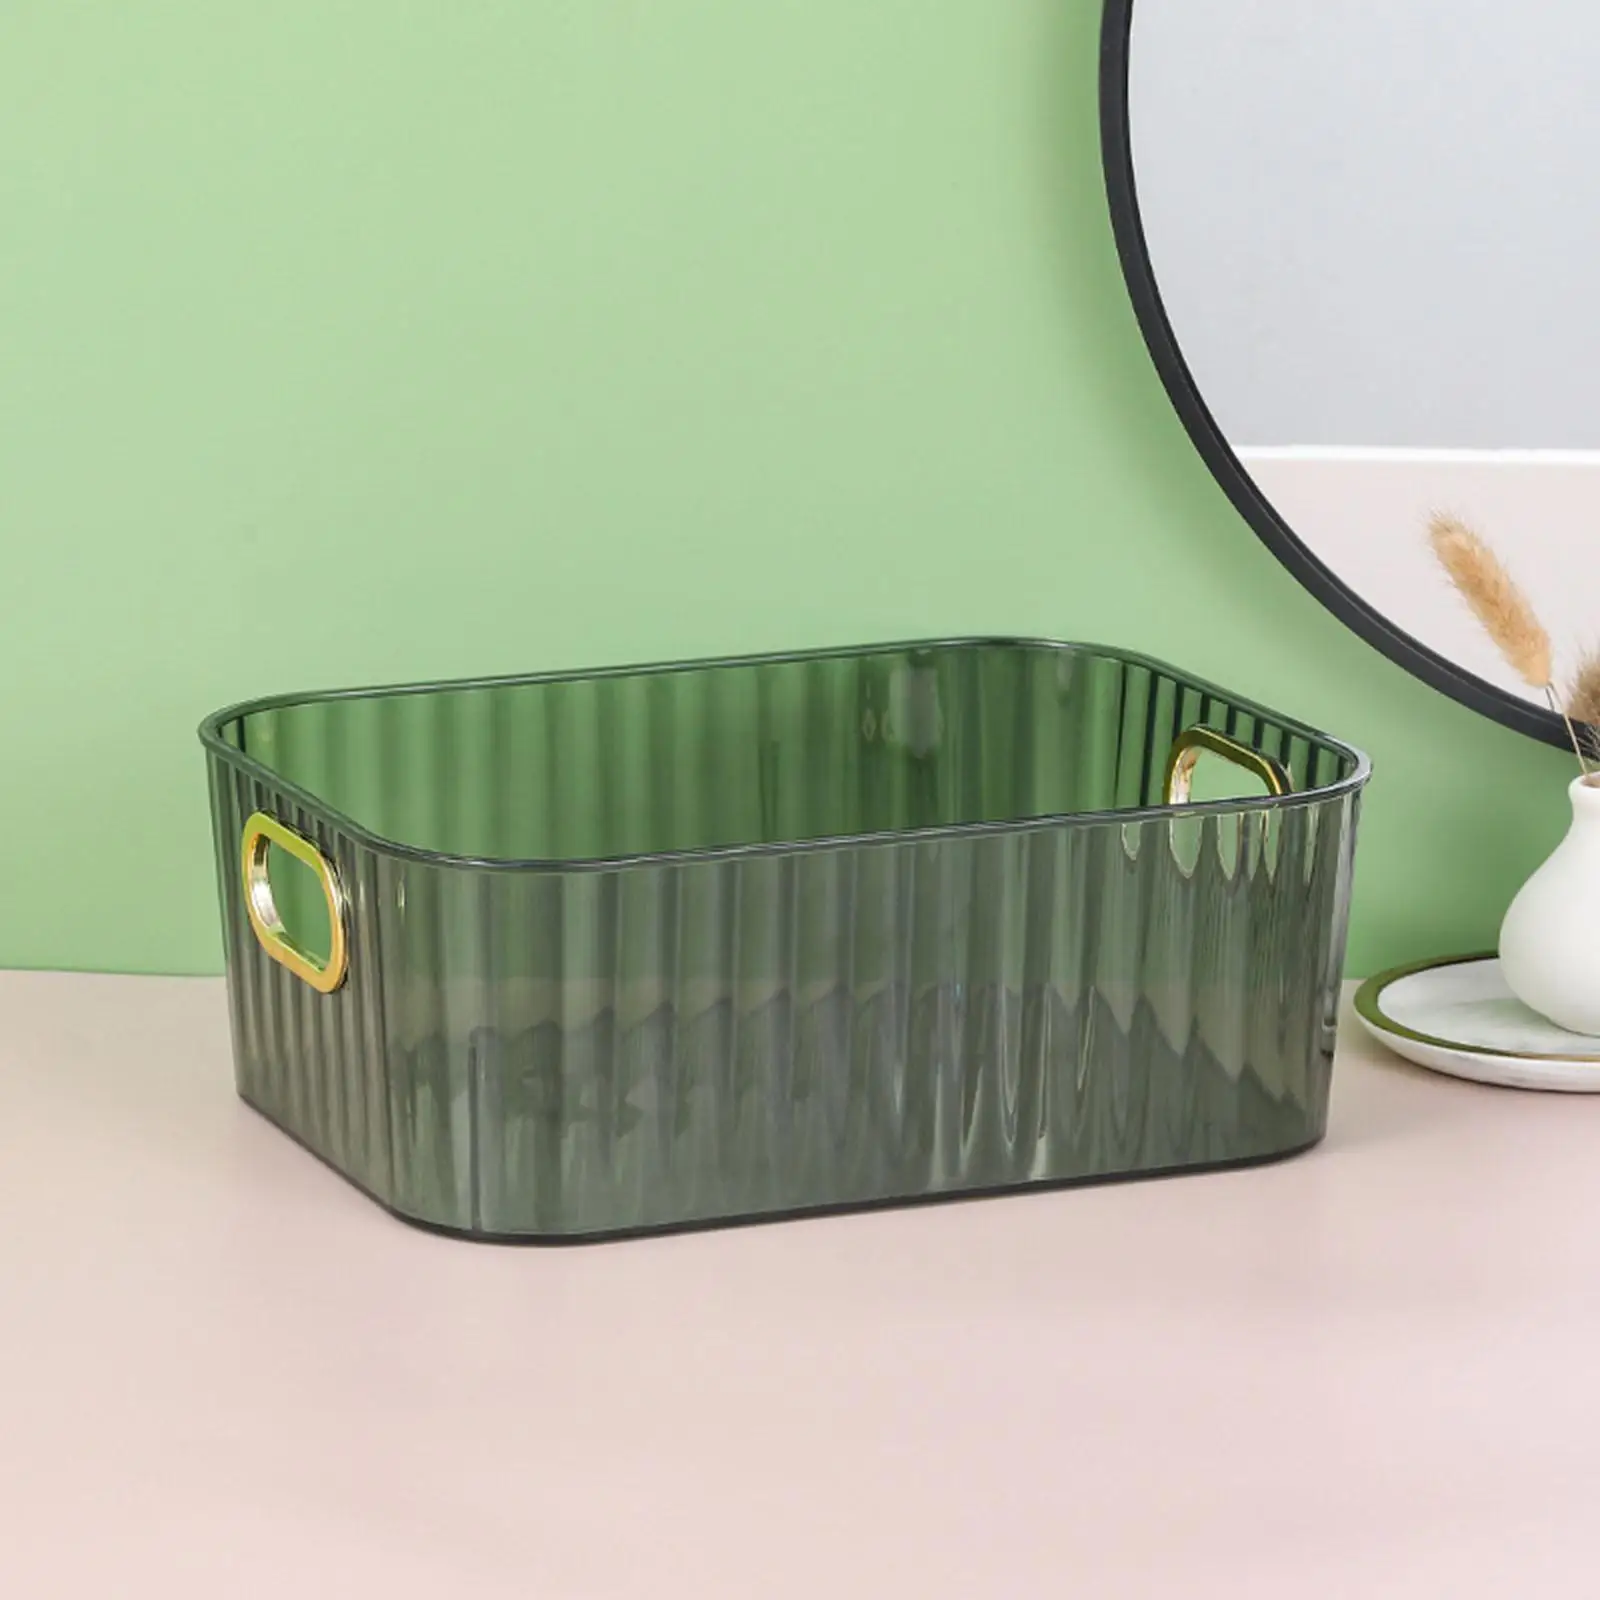 Storage Bin with Handle Rectangular Organization Container Basket for Lipstick Pencils Cosmetics Pantry Shelf Pantry Cabinet